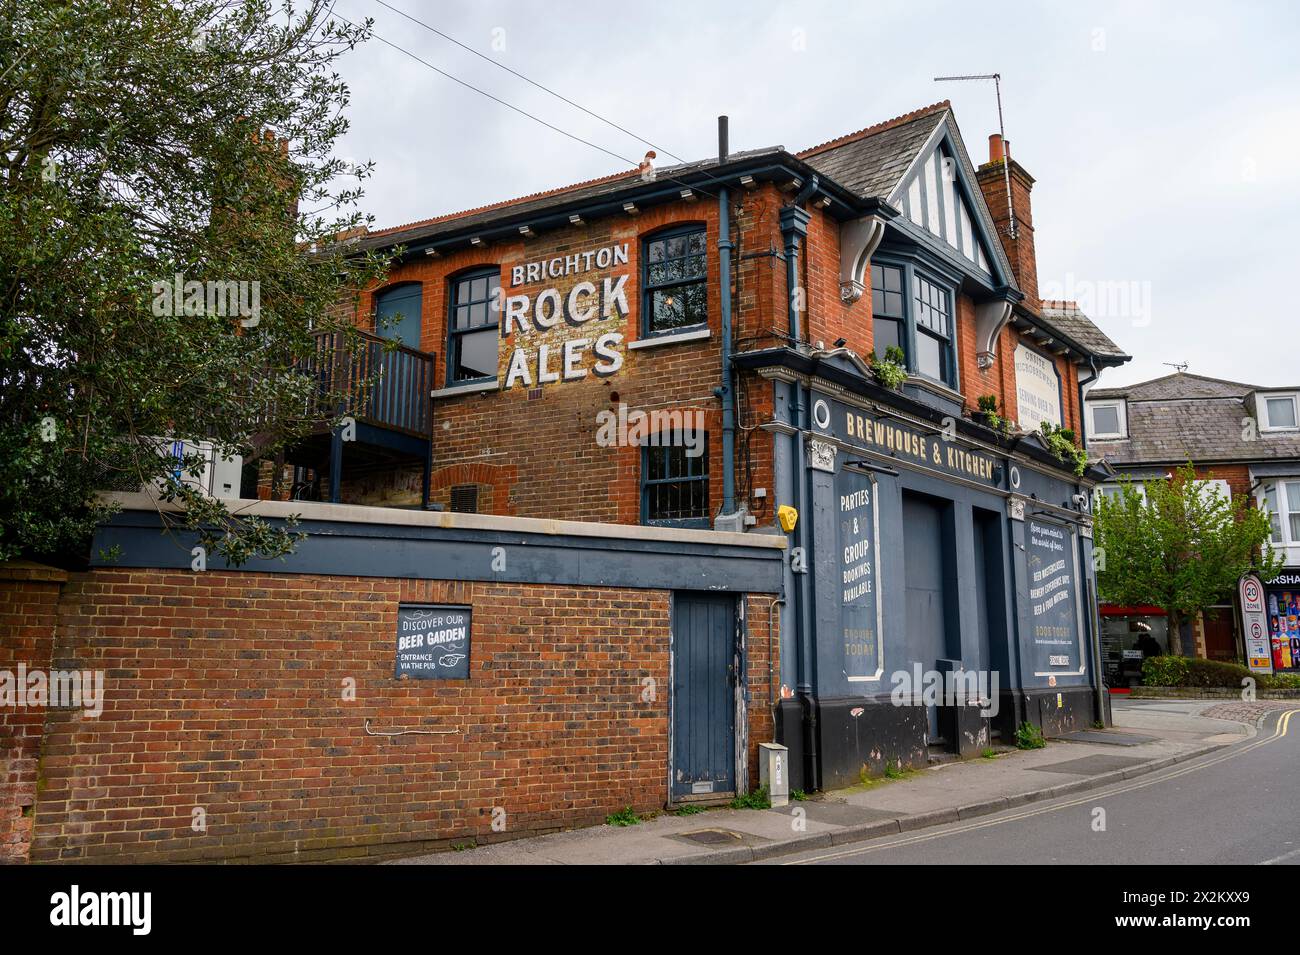 The Brewhouse & Kitchen building with hand painted vintage advert, is a craft beer pub and restaurant in Horsham market town in West Sussex, England. Stock Photo